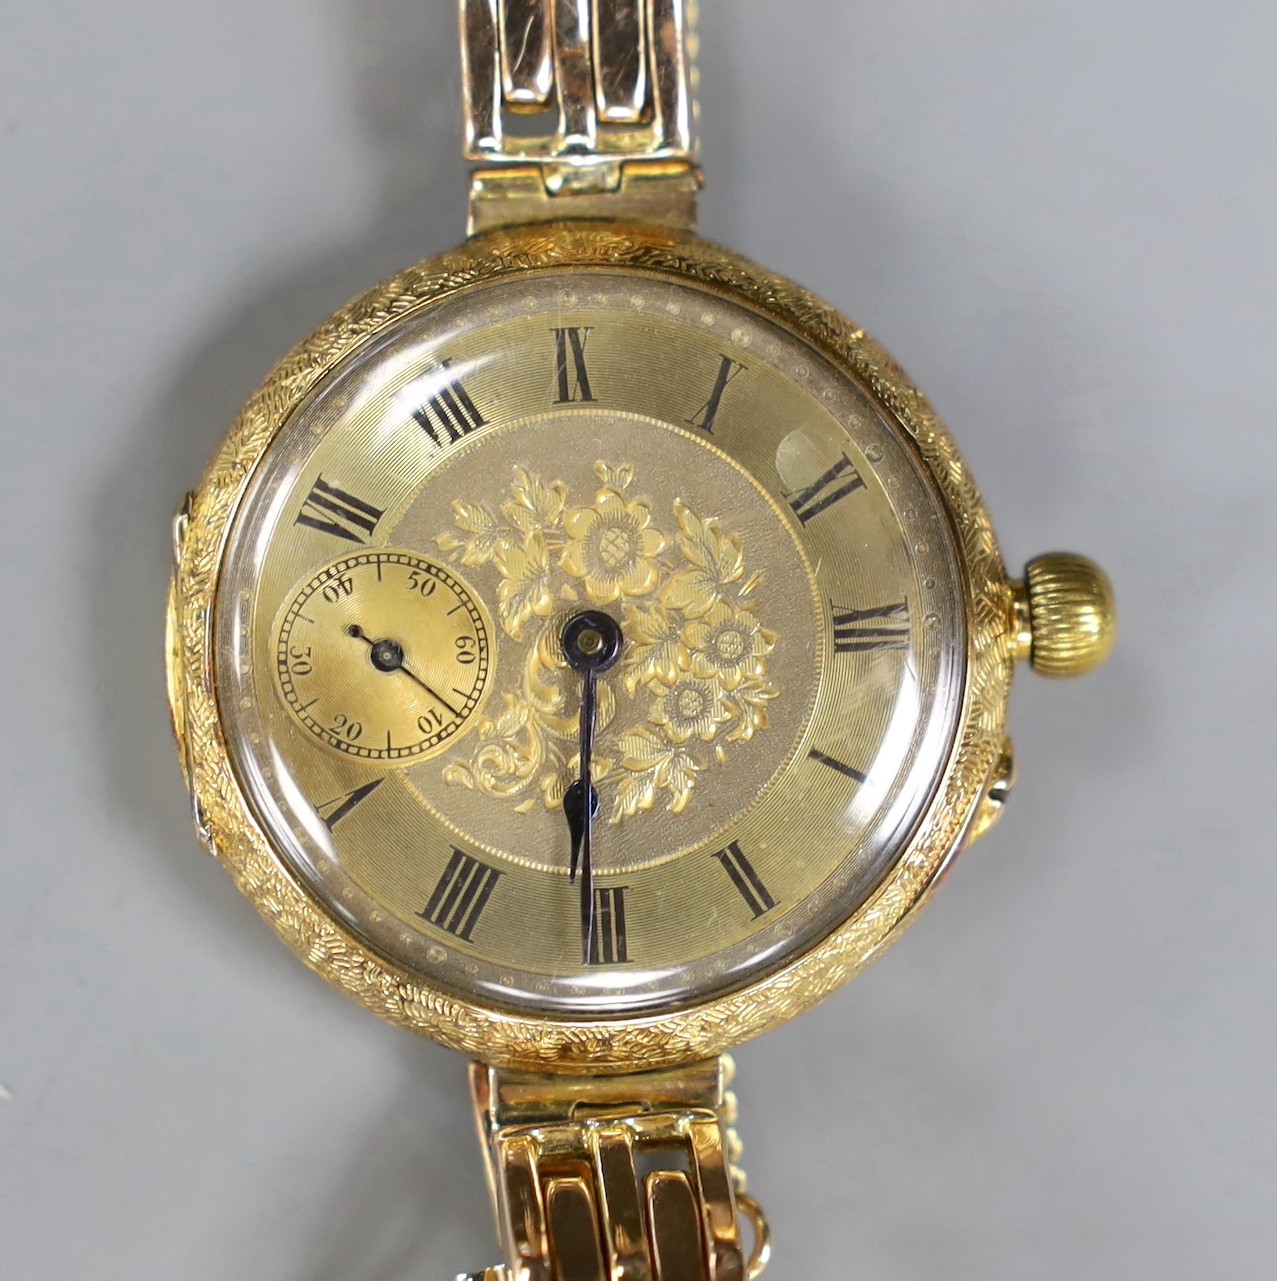 An early 20th century engraved 18ct gold fob watch, now converted to a wrist watch on a later expanding yellow metal bracelet